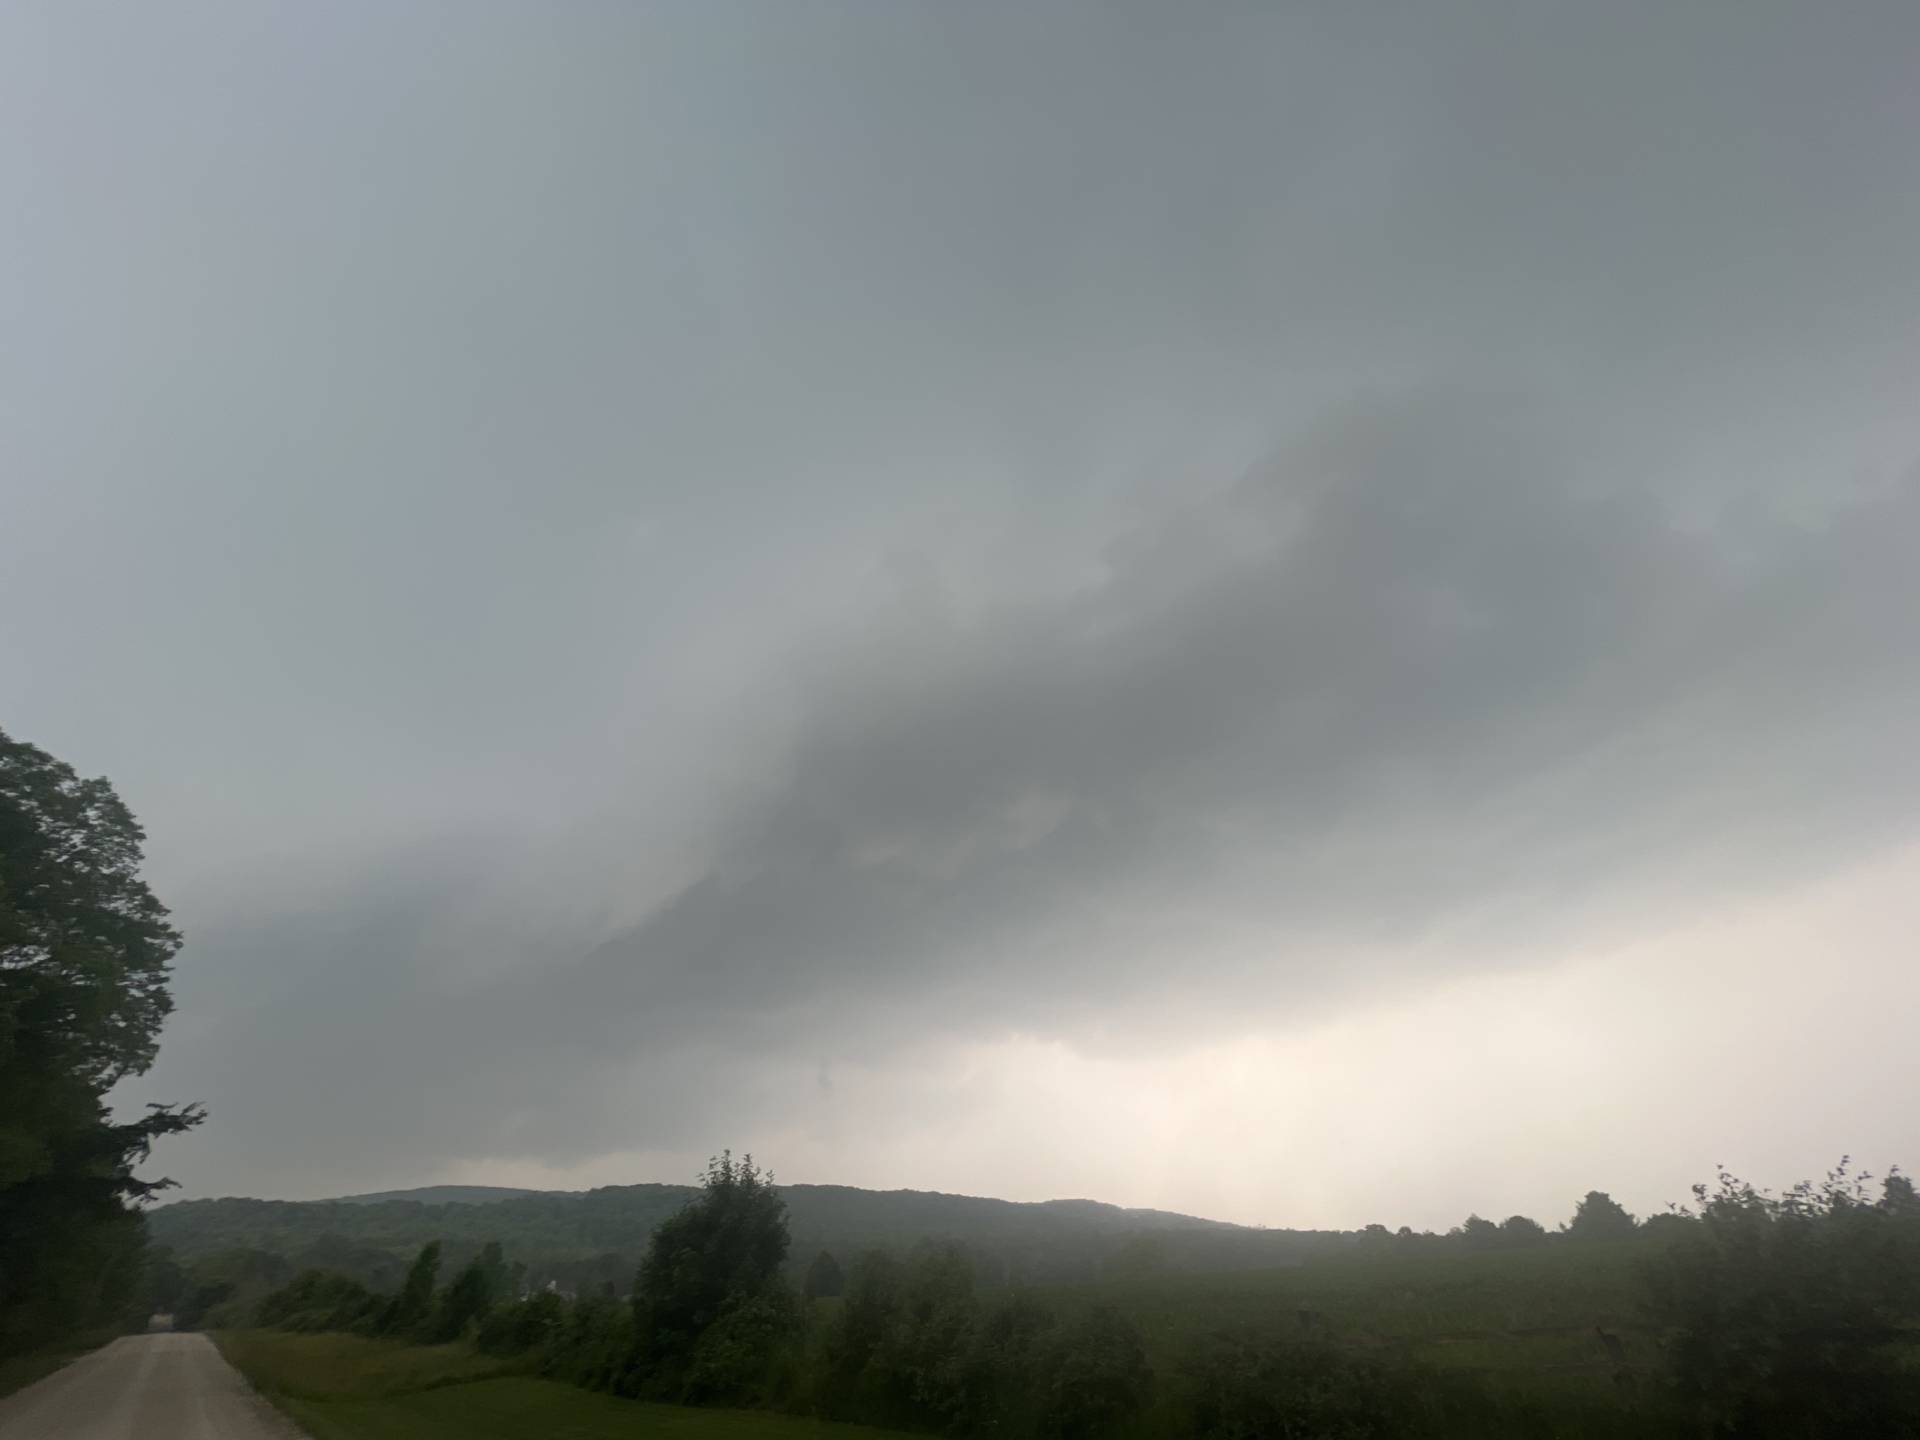 Coming down off the mountain The Blue Mountains, ON 05:05 PM #ONstorm